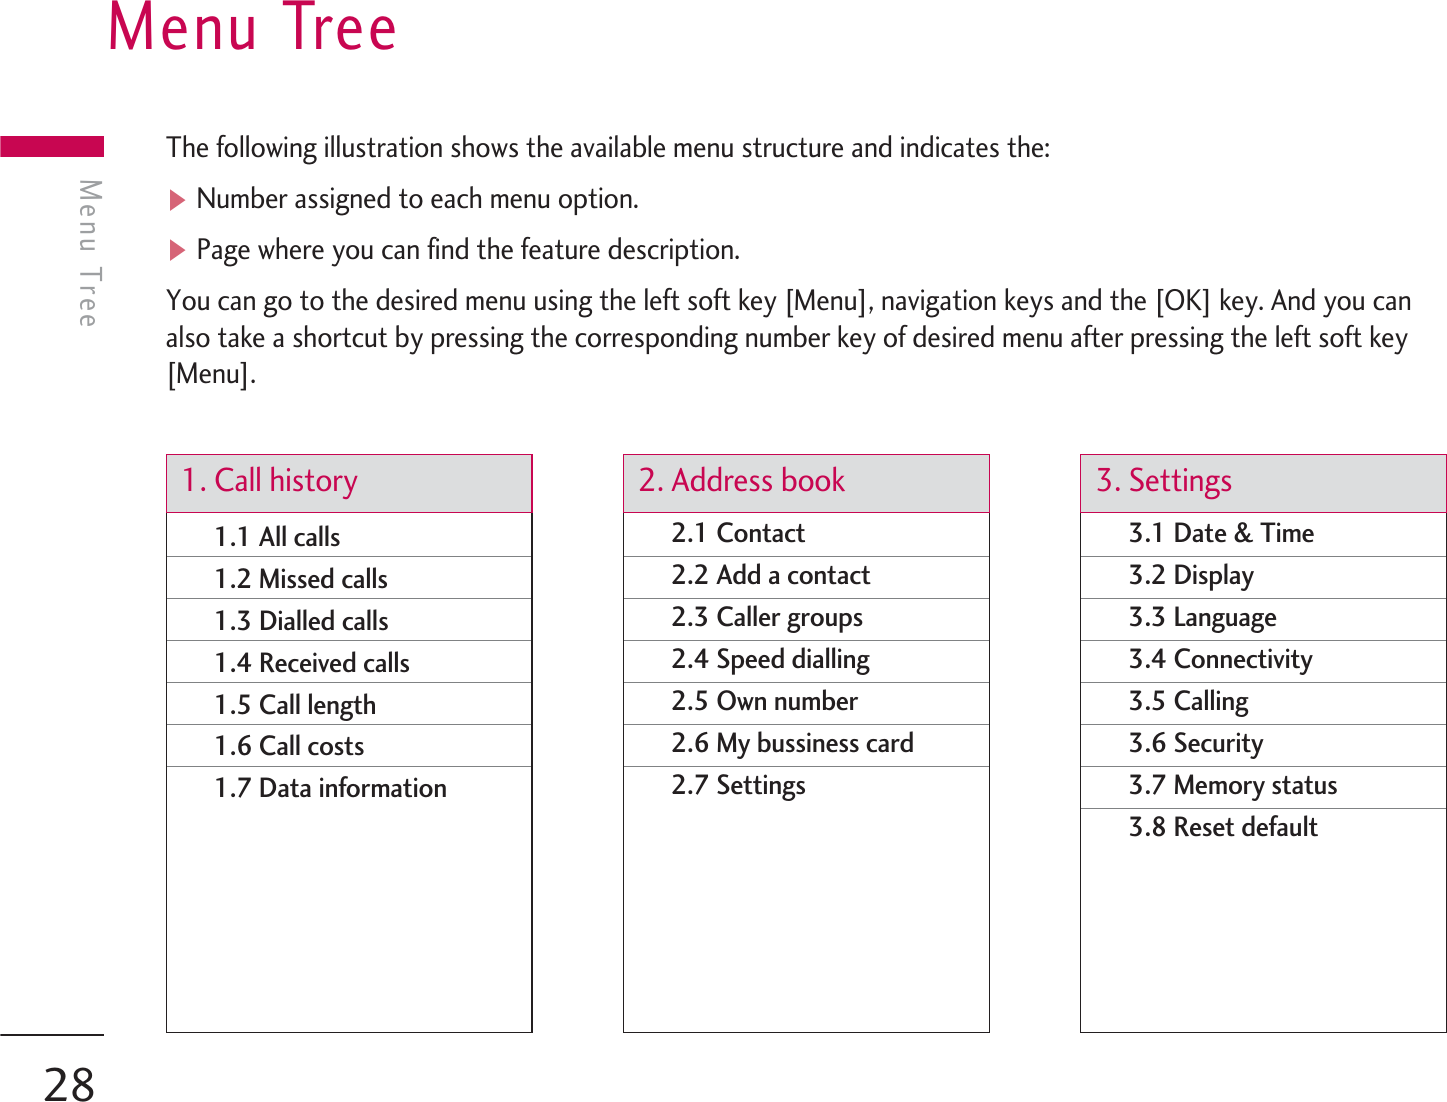 The following illustration shows the available menu structure and indicates the:vNumber assigned to each menu option.vPage where you can find the feature description.You can go to the desired menu using the left soft key [Menu], navigation keys and the [OK] key. And you canalso take a shortcut by pressing the corresponding number key of desired menu after pressing the left soft key[Menu].1.1 All calls1.2 Missed calls1.3 Dialled calls1.4 Received calls1.5 Call length1.6 Call costs1.7 Data information1. Call history2.1 Contact2.2 Add a contact2.3 Caller groups2.4 Speed dialling2.5 Own number2.6 My bussiness card2.7 Settings2. Address book3.1 Date &amp; Time3.2 Display3.3 Language3.4 Connectivity3.5 Calling3.6 Security3.7 Memory status3.8 Reset default3. SettingsMenu TreeMenu Tree28